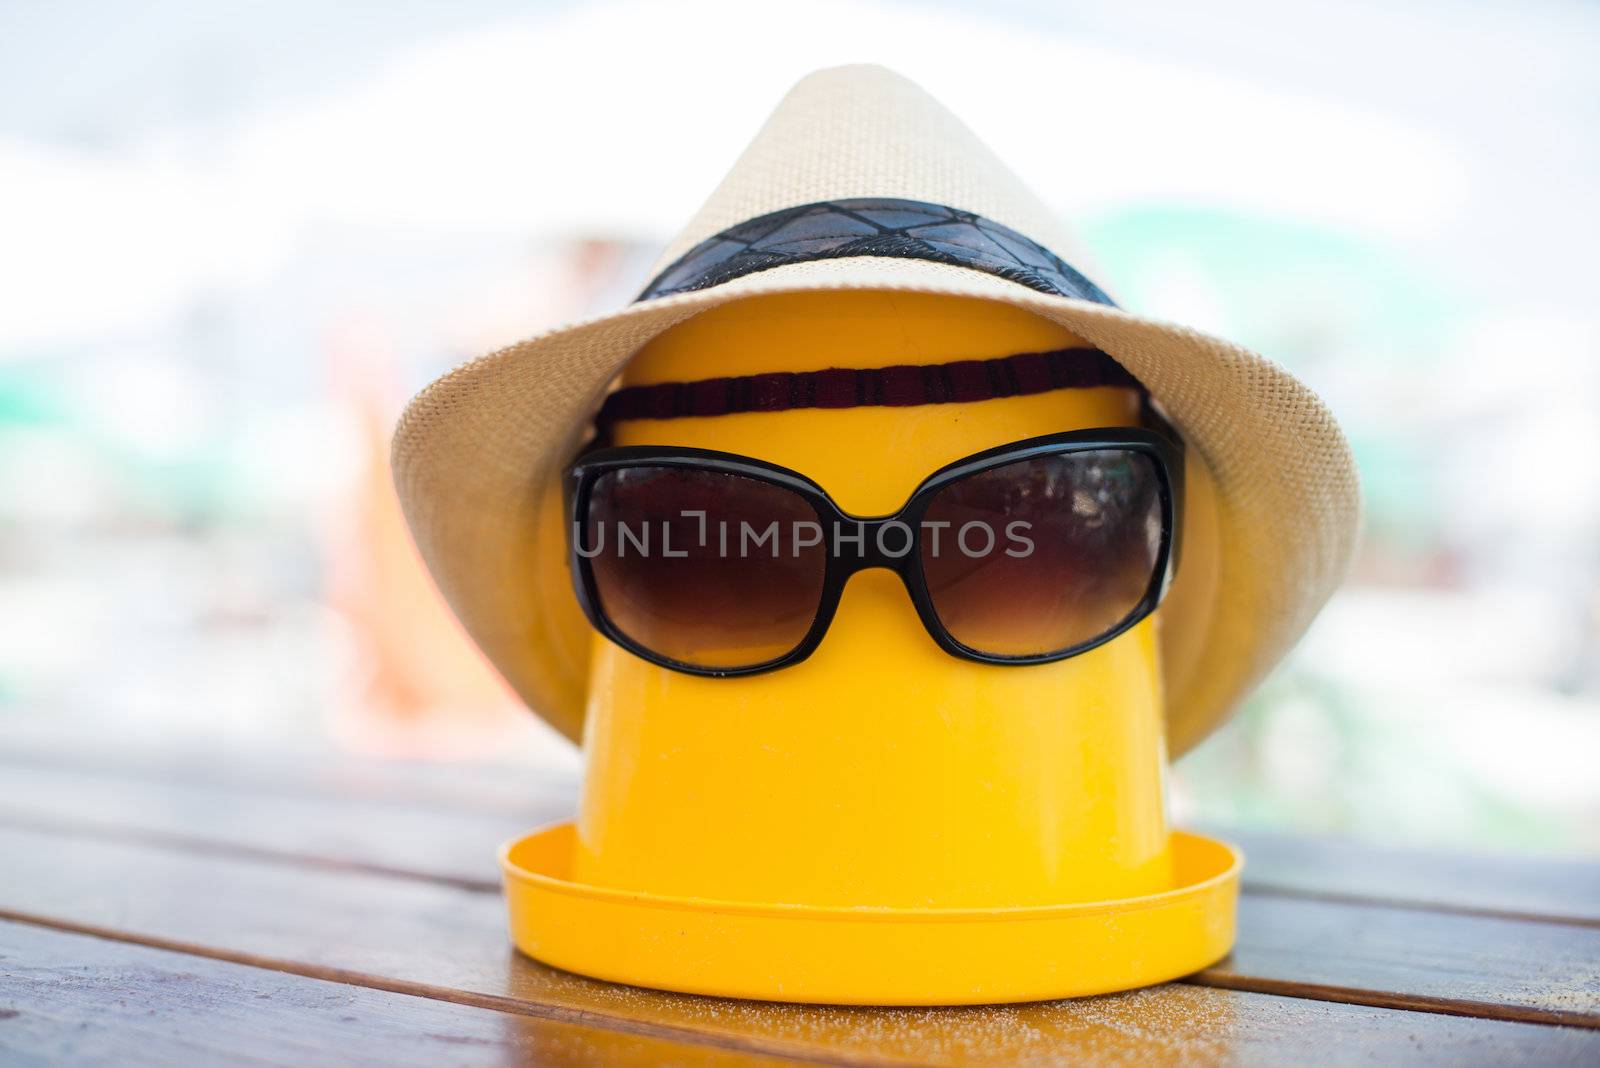 The Beach scene with bucket and sunglasses by Nickolya